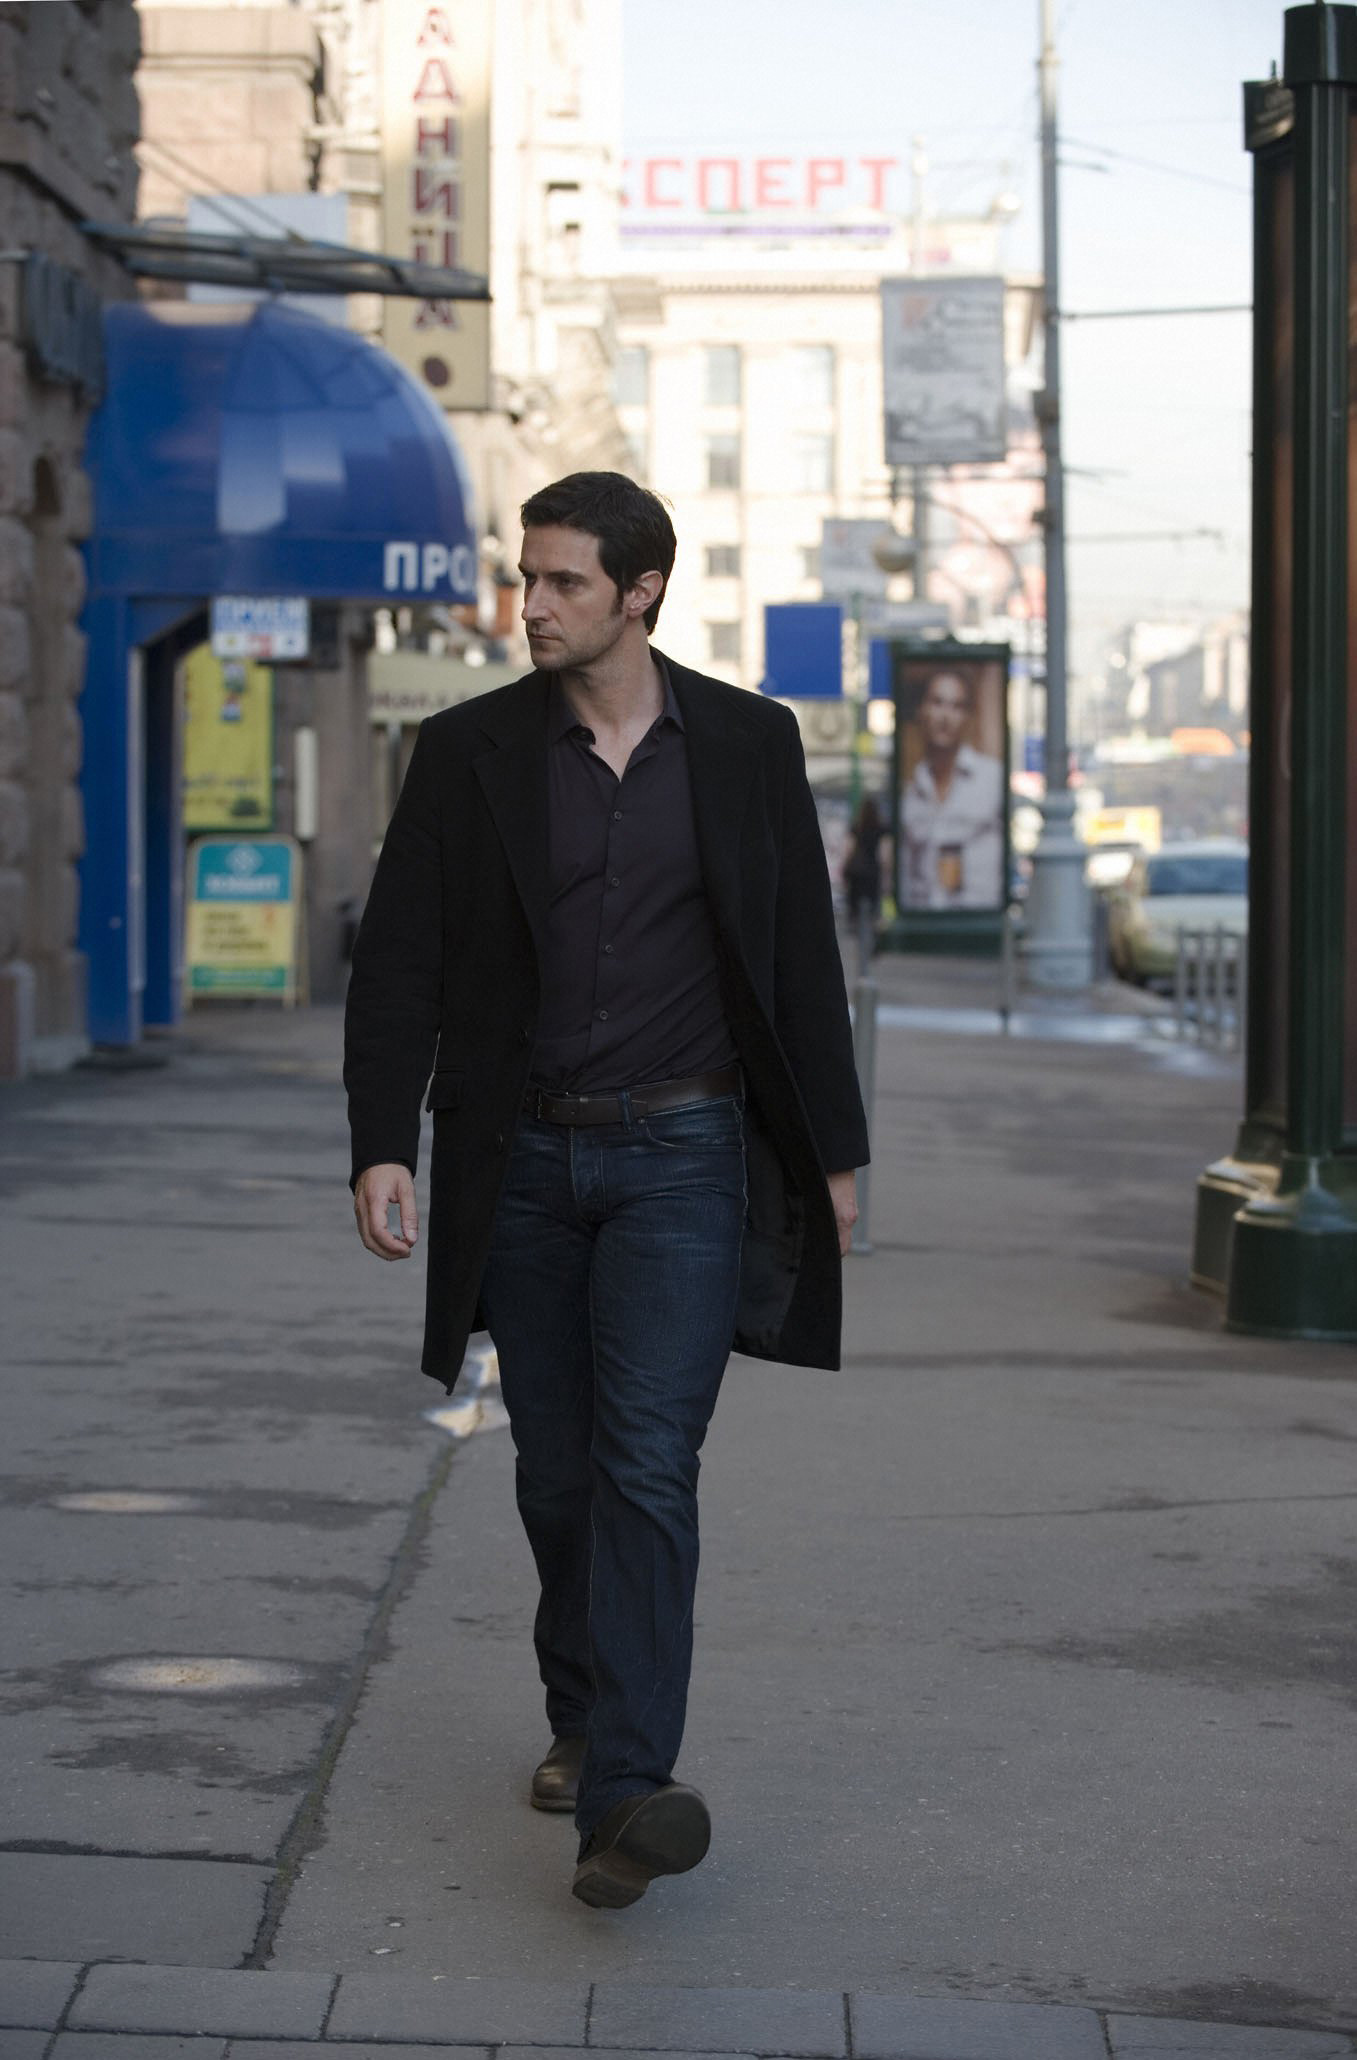 1357x2060 My knowing that the original Richard Armitage image had a Moscow city  background as he walked in character as Lucas North in Spooks (series 7) ...